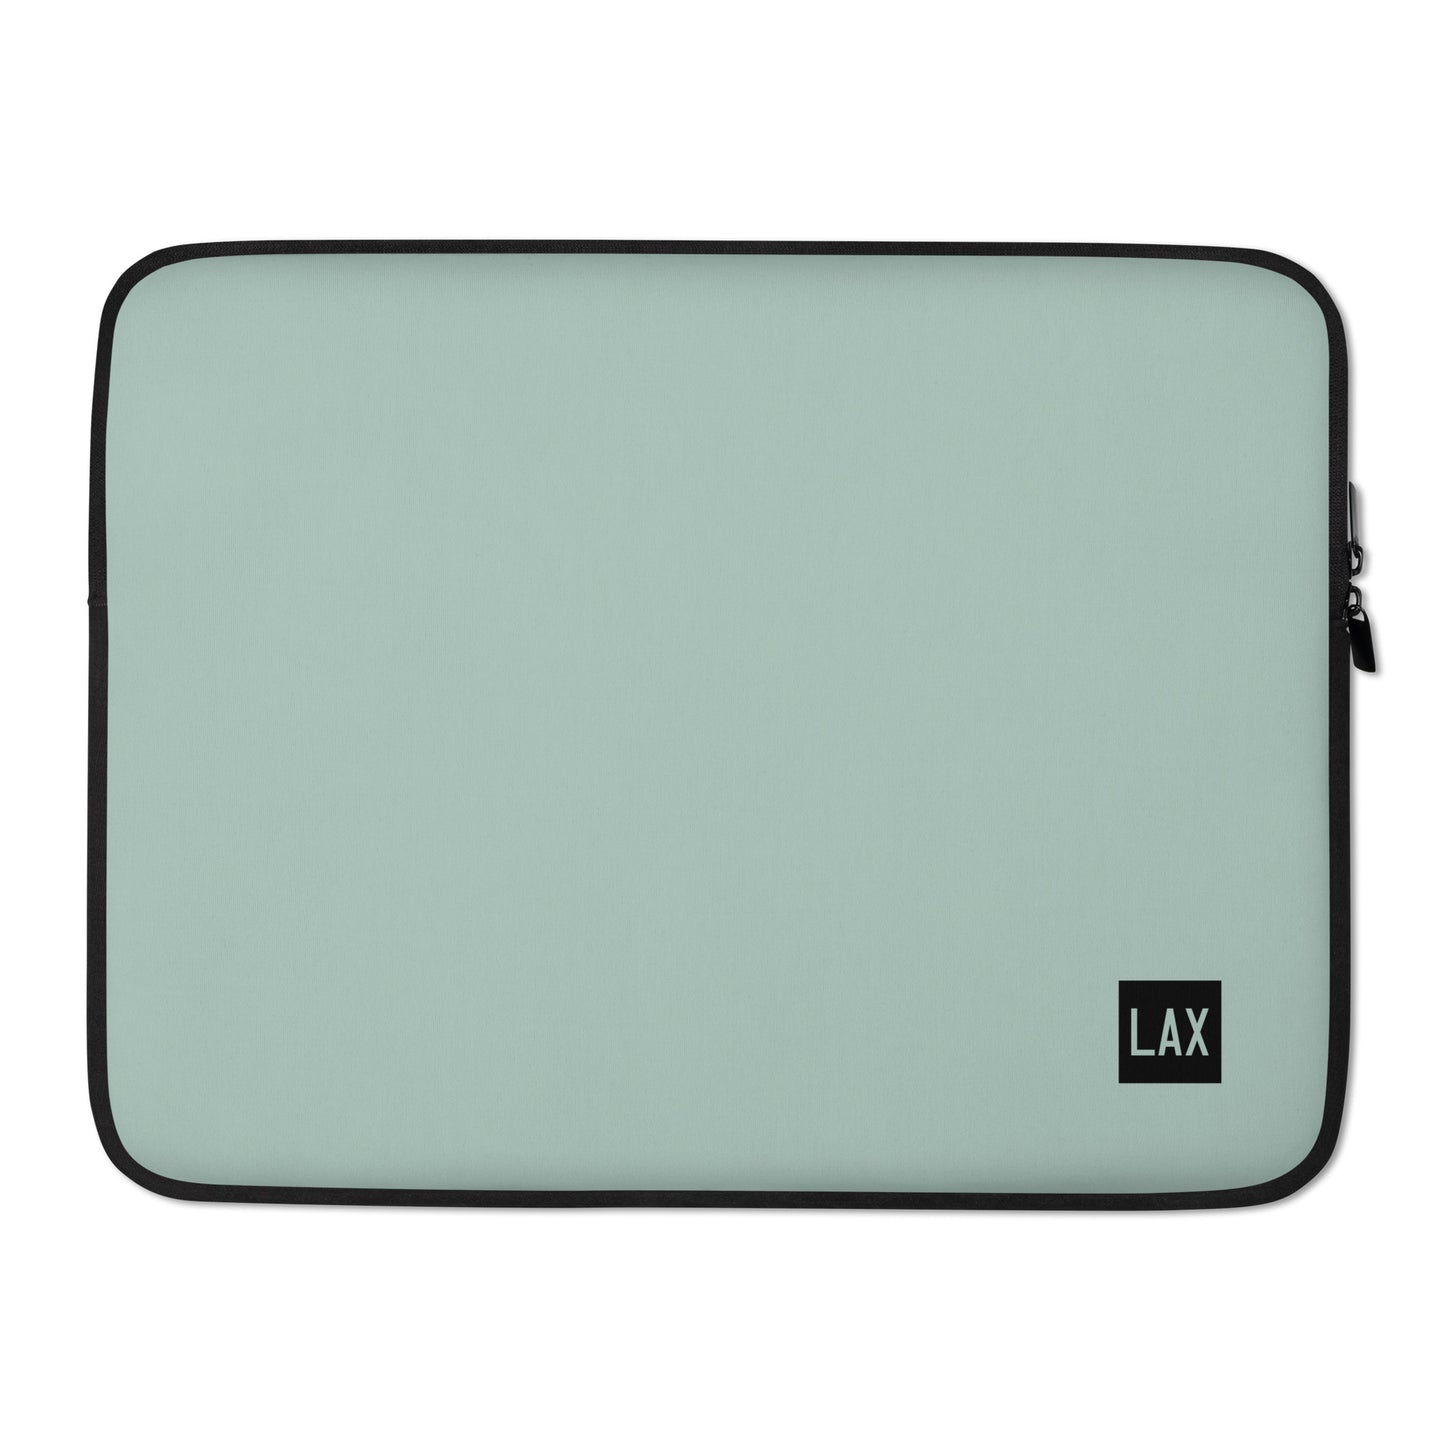 Aviation Gift Laptop Sleeve - Opal Green • LAX Los Angeles • YHM Designs - Image 02